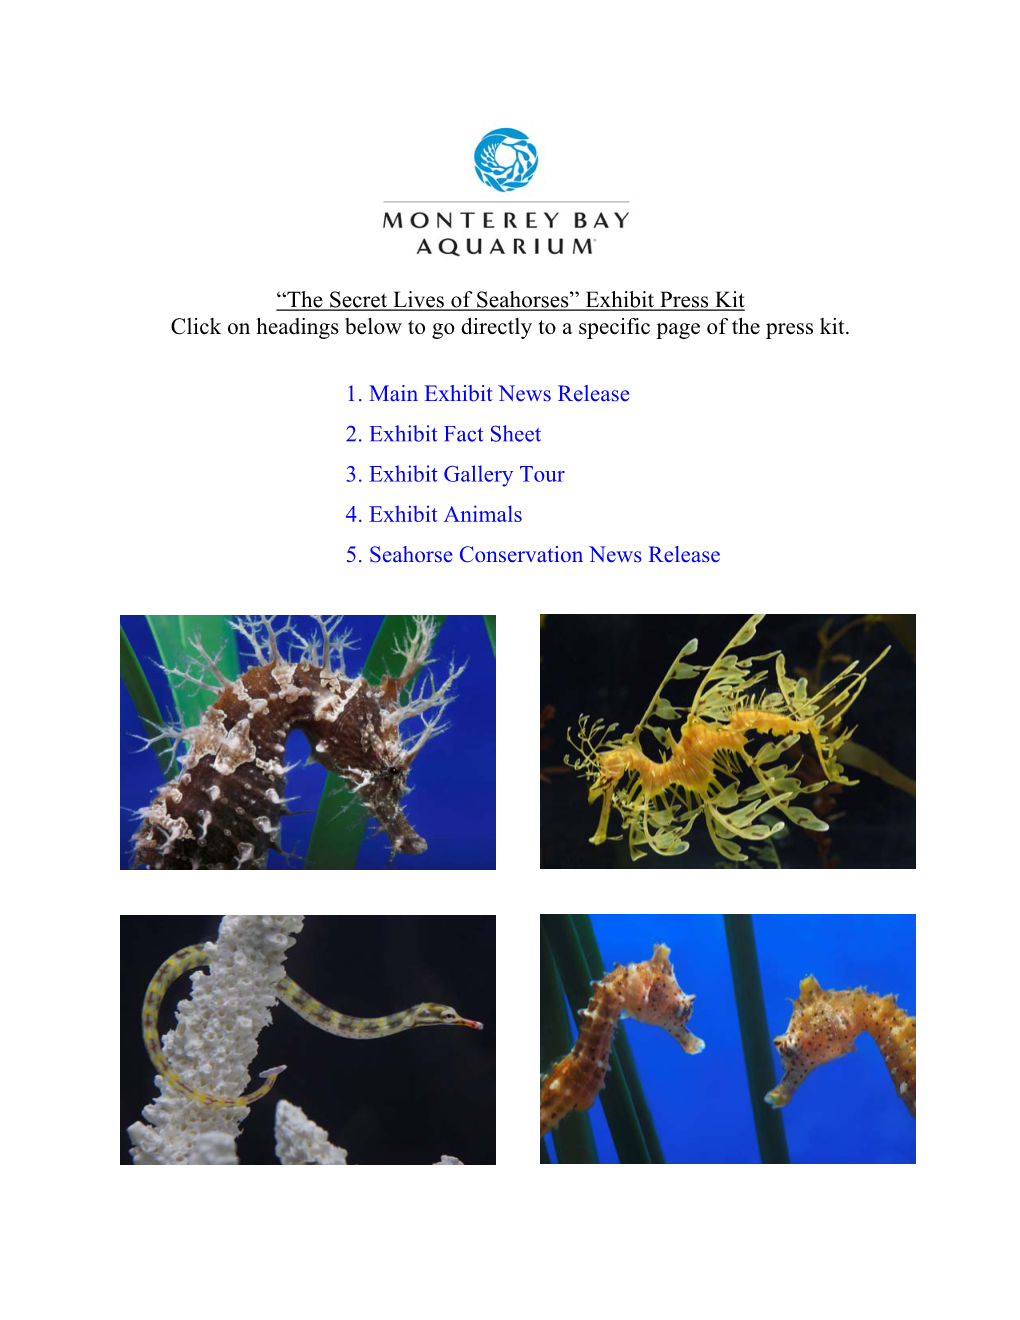 The Secret Lives of Seahorses” Exhibit Press Kit Click on Headings Below to Go Directly to a Specific Page of the Press Kit